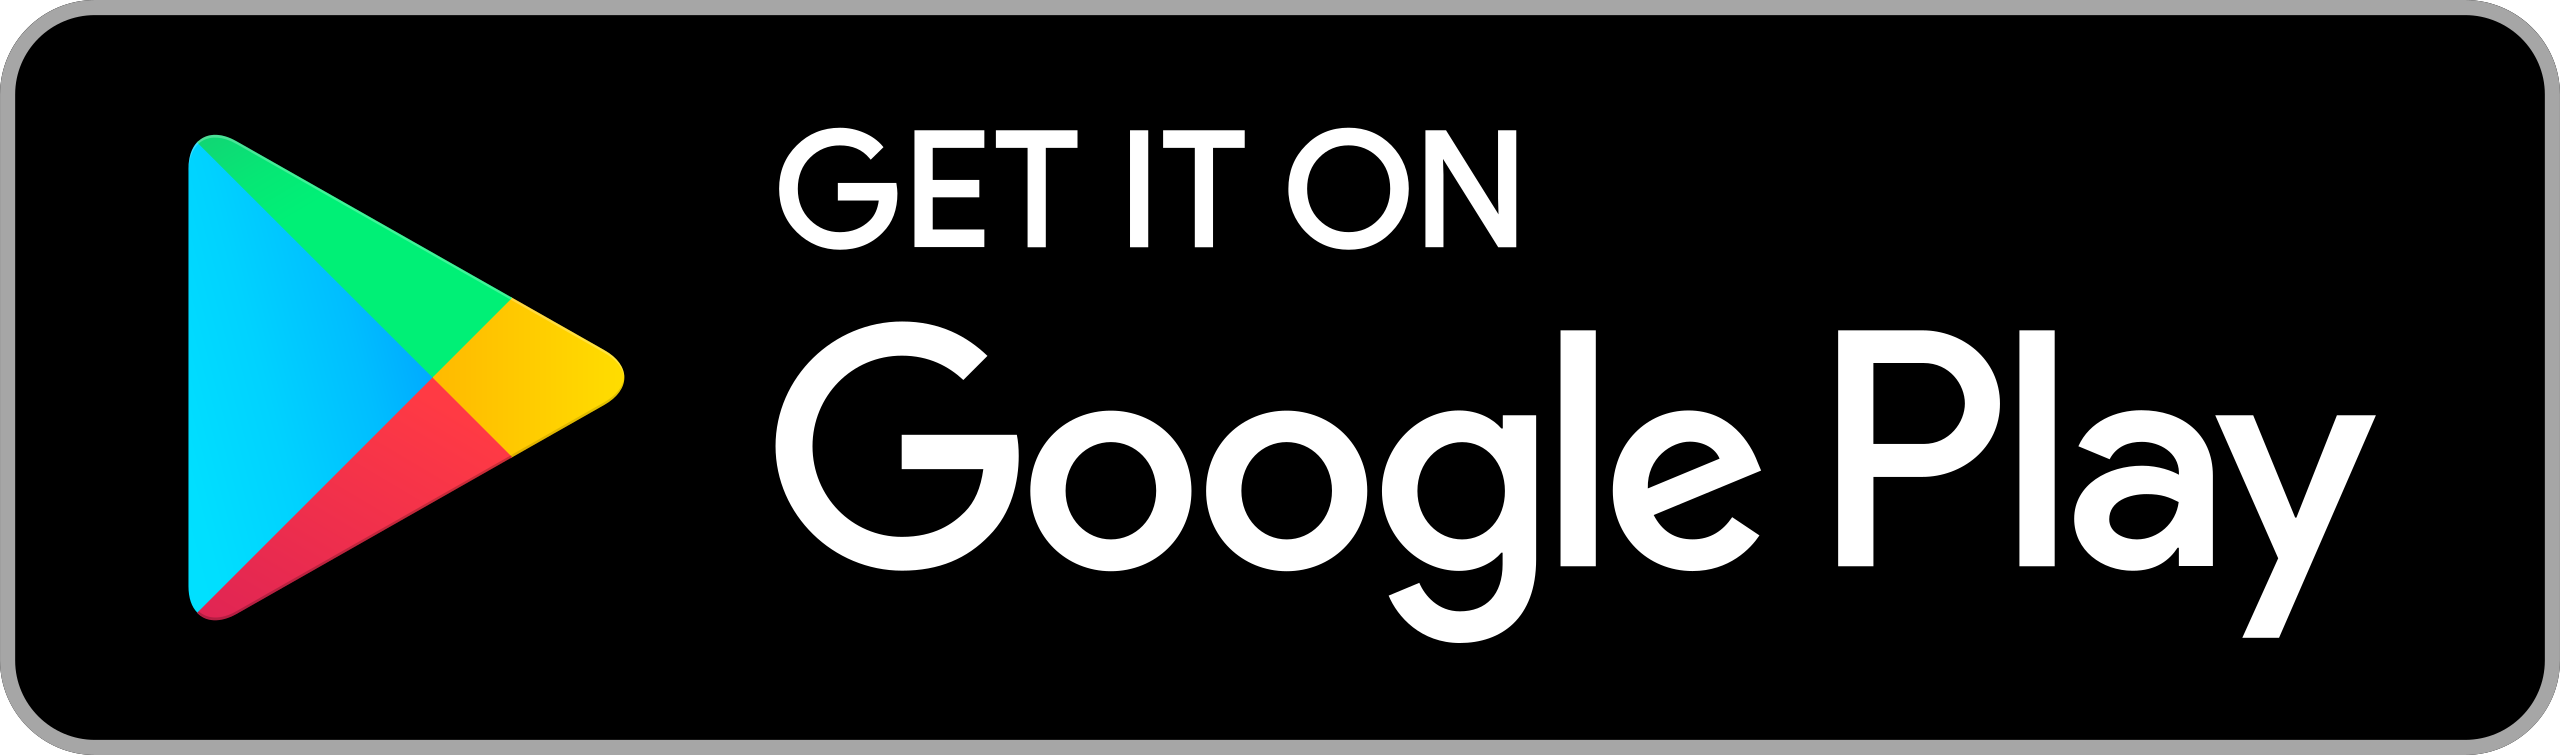 download_on_the_google_play_logo